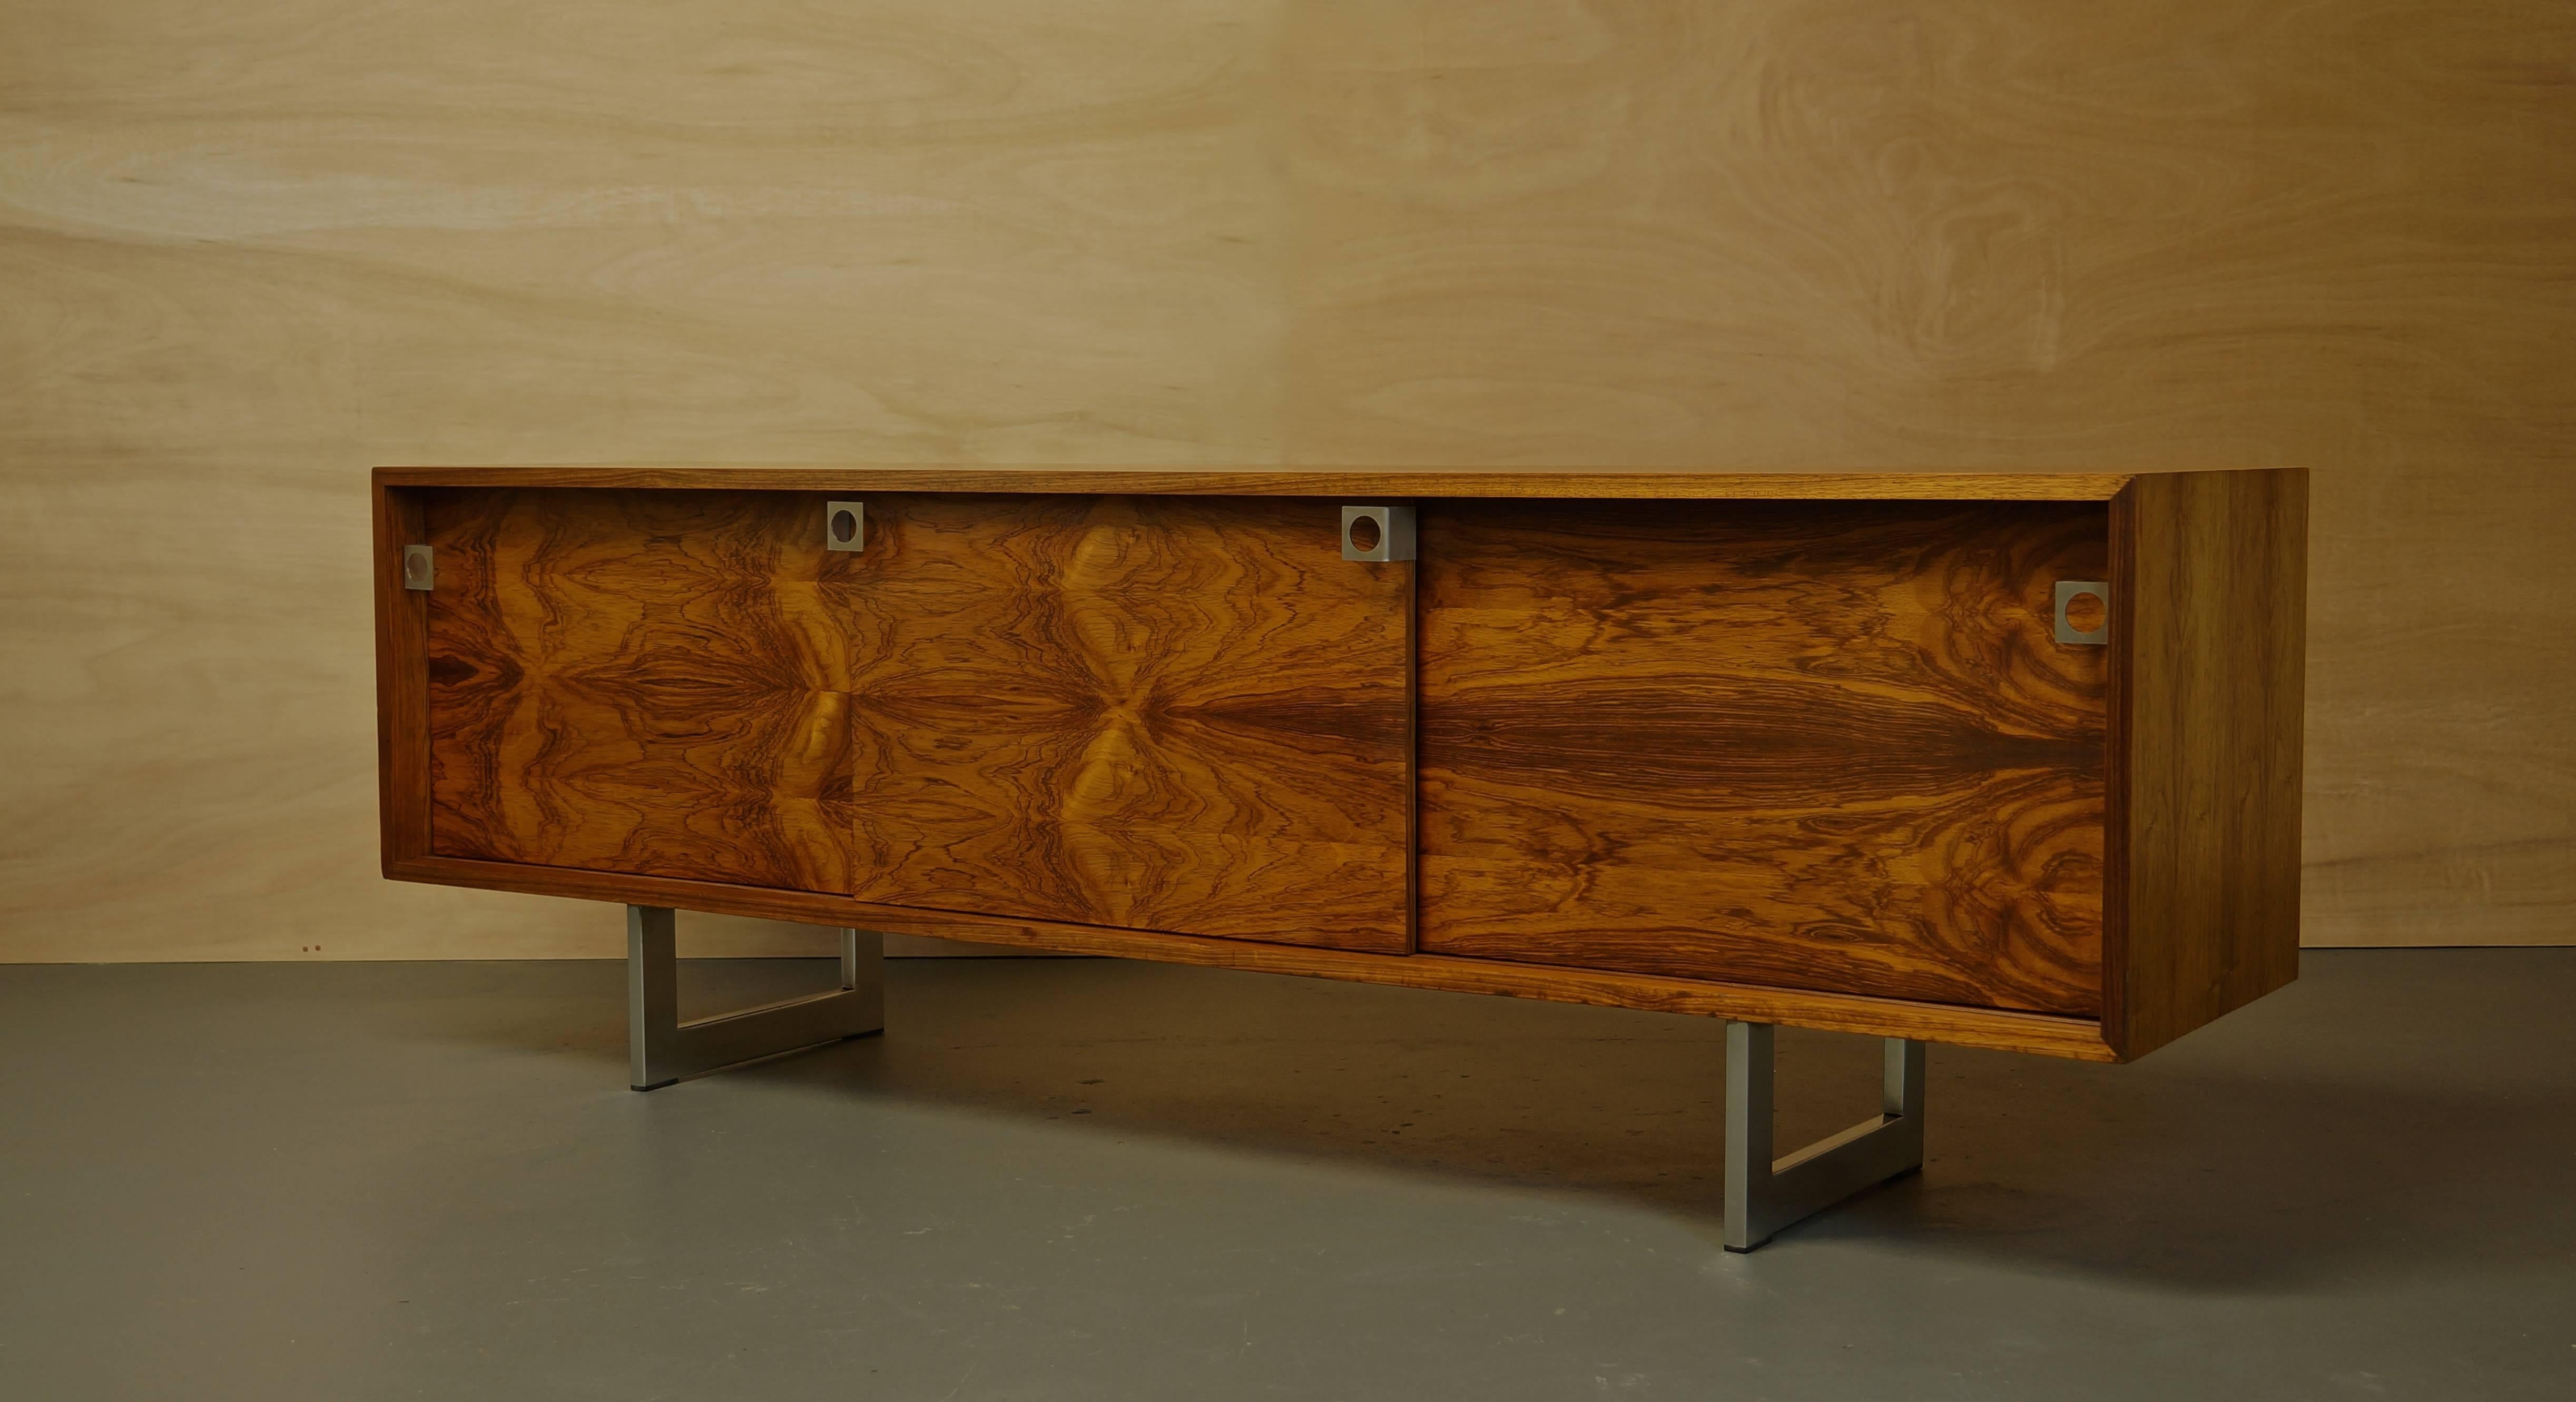 Rare Danish rosewood sideboard or Credenza by Bodil Kjaer. 

A beautiful rosewood storage cabinet with incredible natural grains.

This rare model features three sliding doors with steel handles.

Designed in 1959 and produced by E. Pedersen